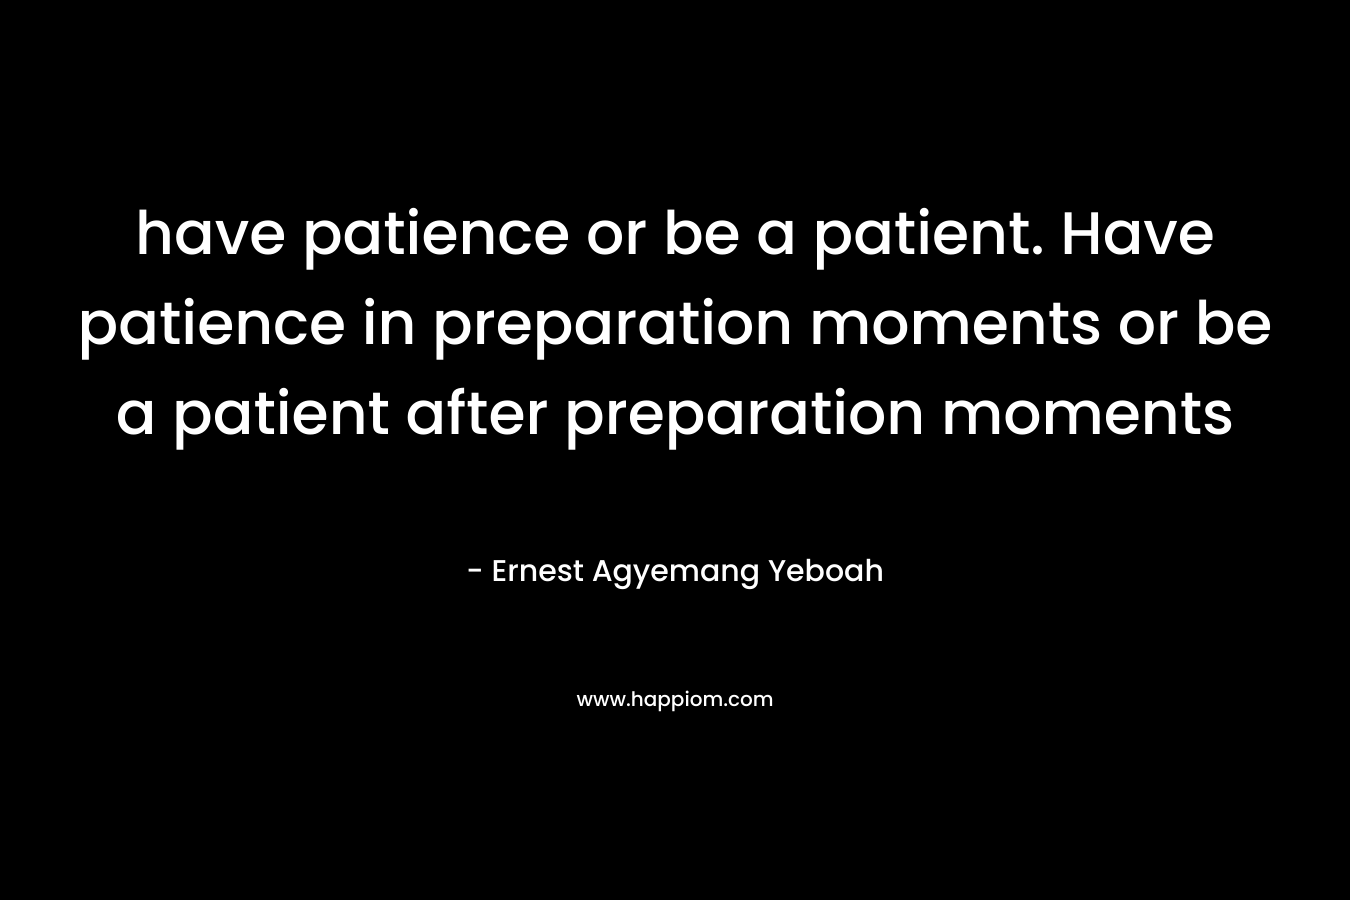 have patience or be a patient. Have patience in preparation moments or be a patient after preparation moments